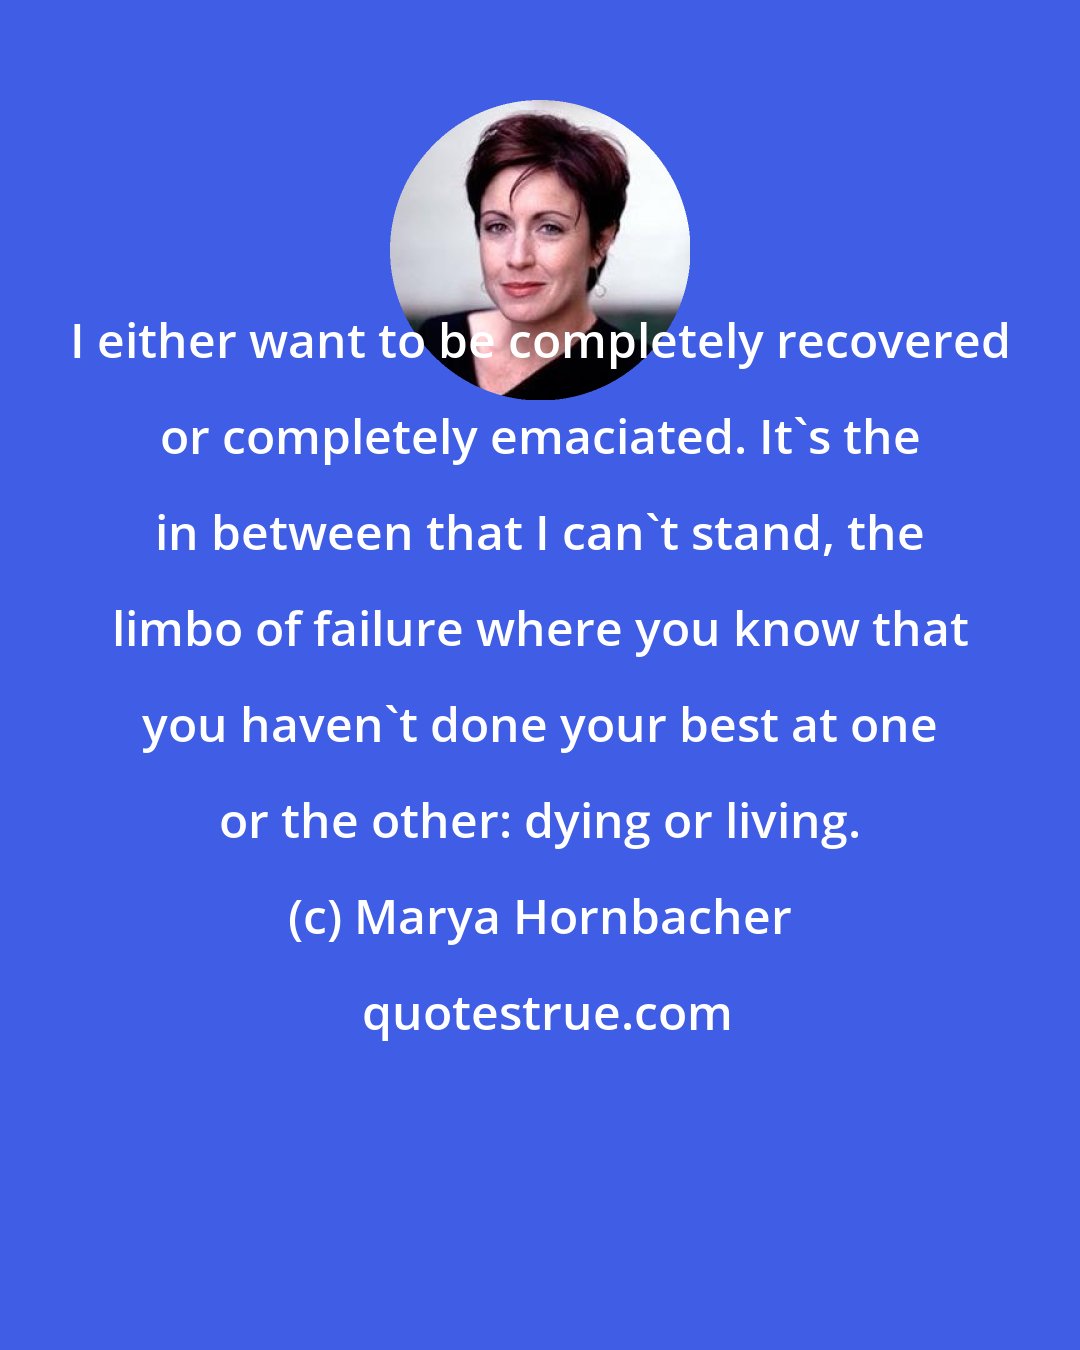 Marya Hornbacher: I either want to be completely recovered or completely emaciated. It's the in between that I can't stand, the limbo of failure where you know that you haven't done your best at one or the other: dying or living.